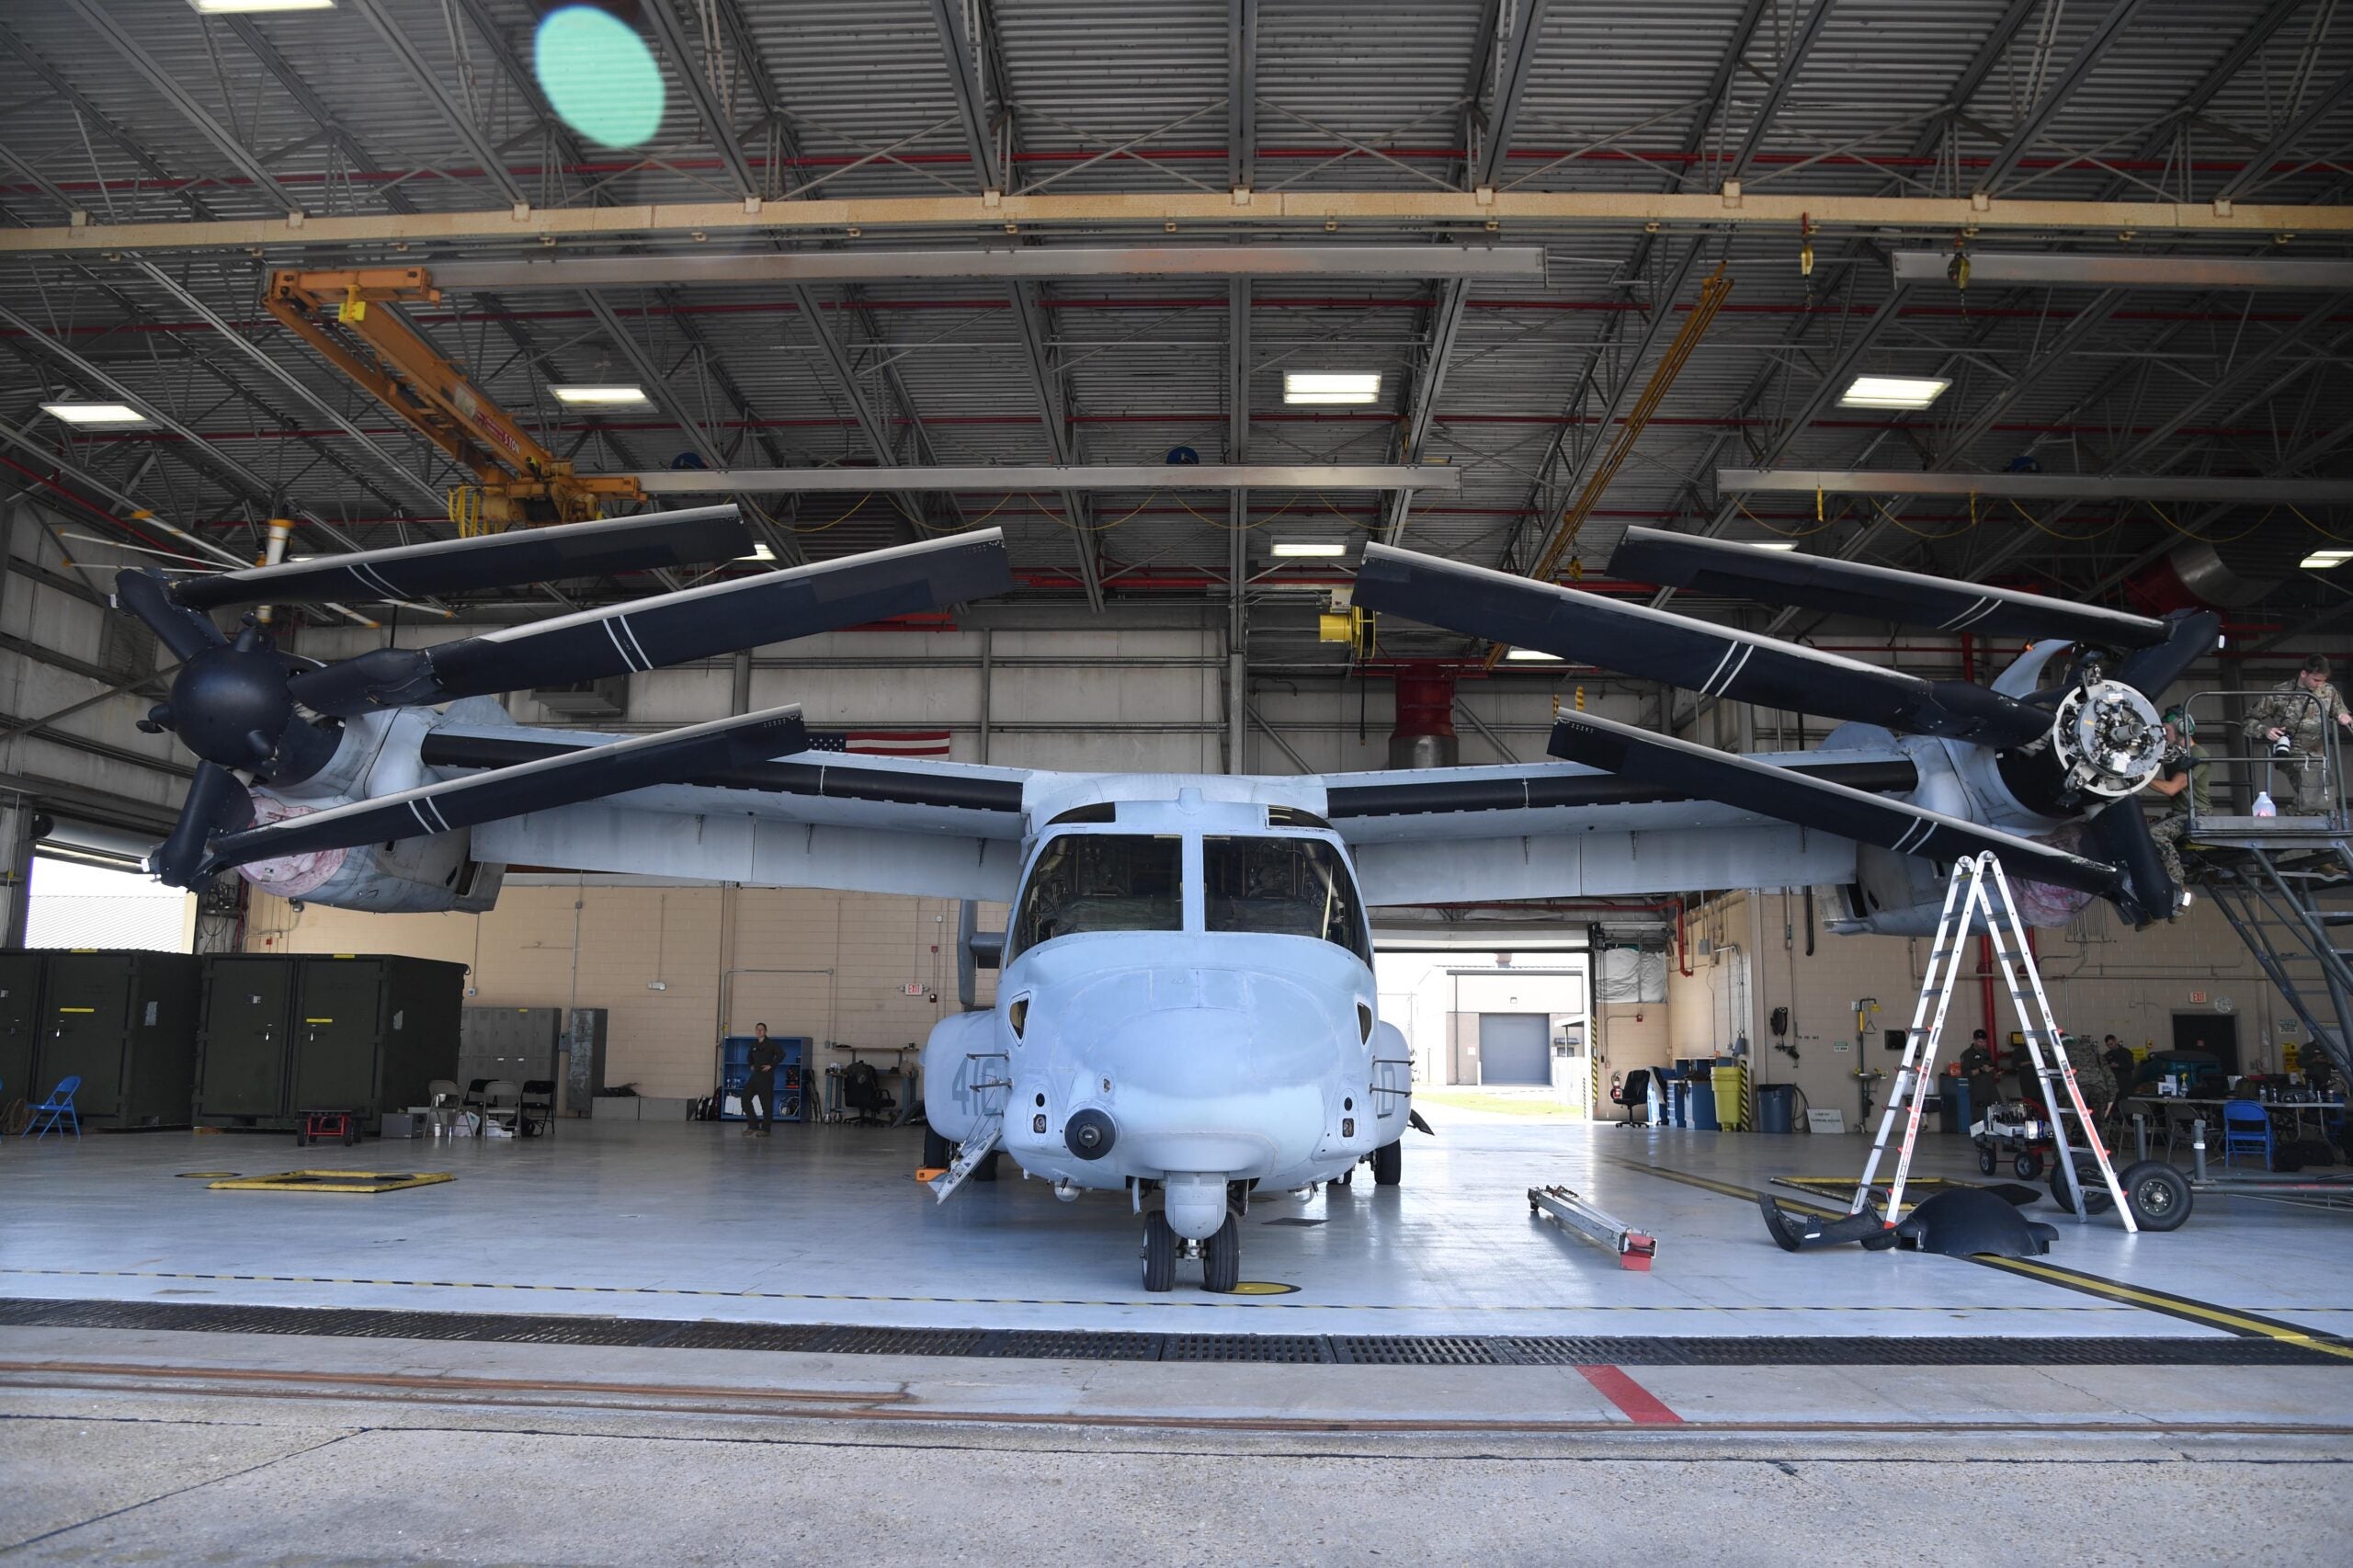 A MV-22B Osprey from the Marine Medium Tiltrotor Squadron 774, Naval Air Station Norfolk, Virginia, receives routine maintenance inside a hangar at Keesler Air Force Base, Mississippi, Oct. 23, 2020. Marines came to Keesler to conduct routine training operations in and around the Mississippi area. (U.S. Air Force photo by Kemberly Groue)